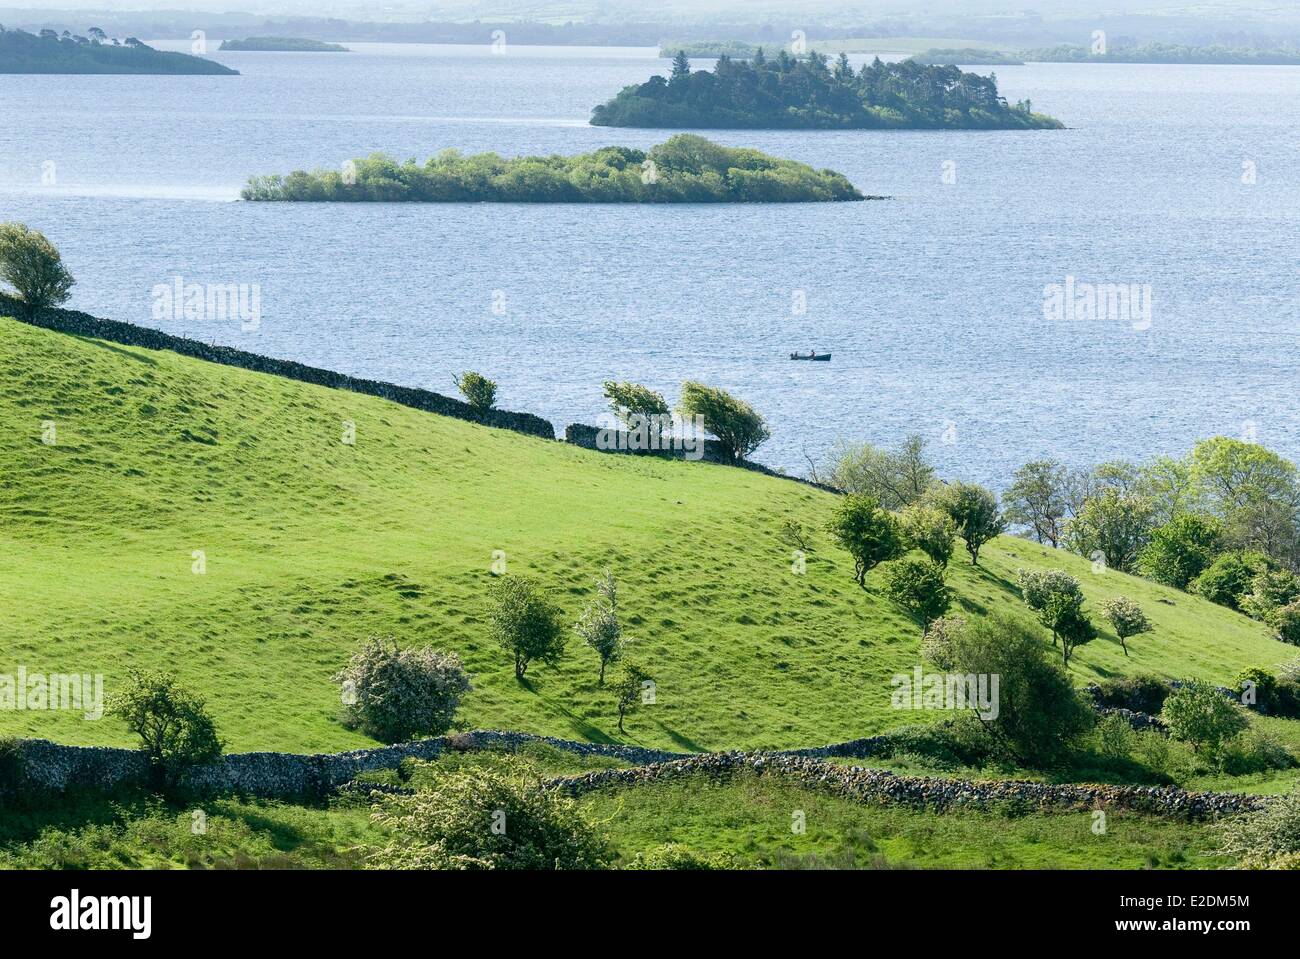 Ireland Galway County Connemara National Park boat on Loch Corrib pastures bounded by dry stone walls Stock Photo